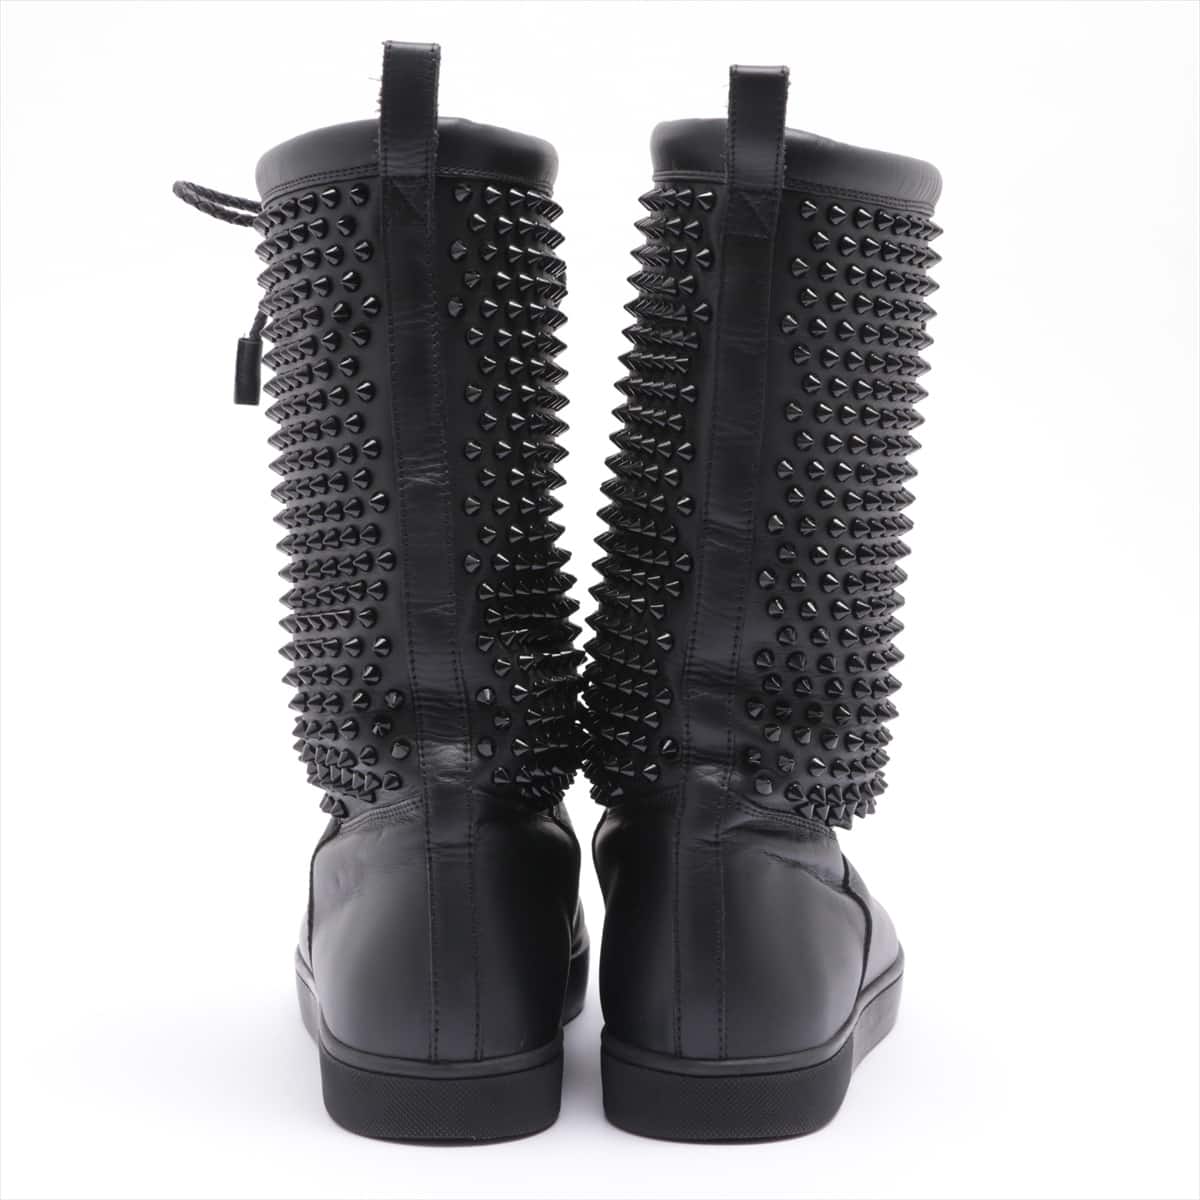 Christian Louboutin Leather Boots 42 Men's Black 3130867 Spike Studs